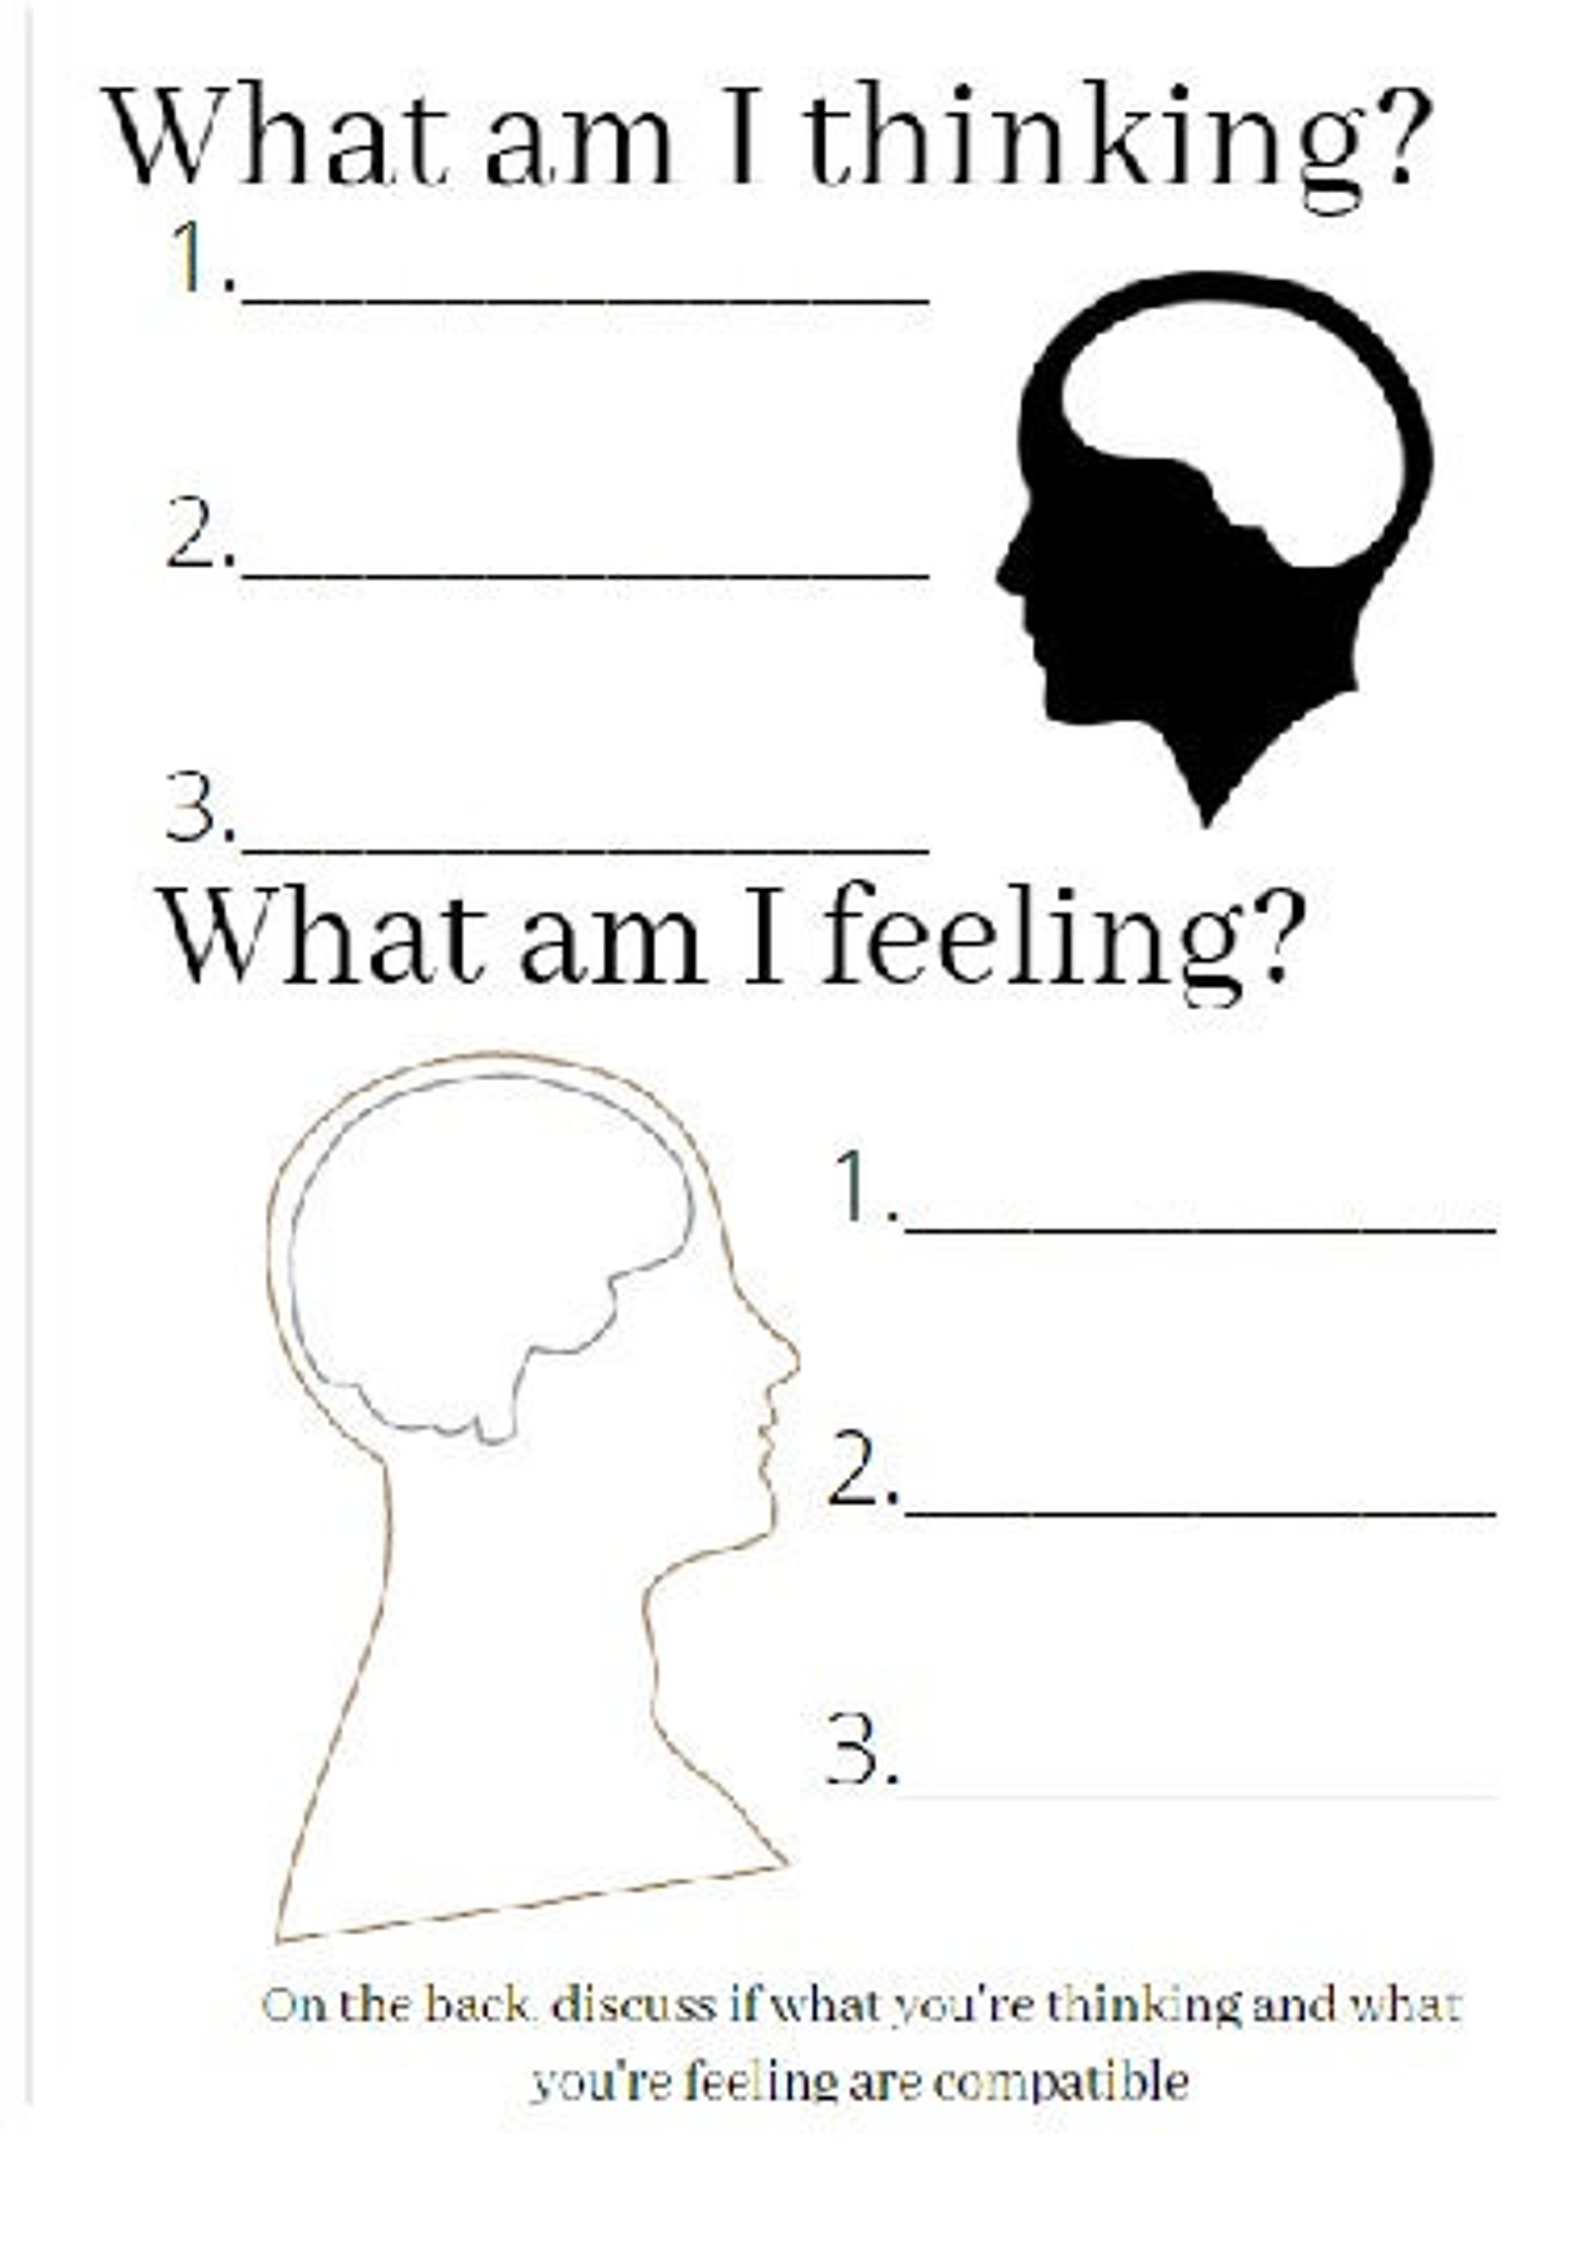 feeling-vs-thinking-worksheet-for-kids-and-adults-etsy